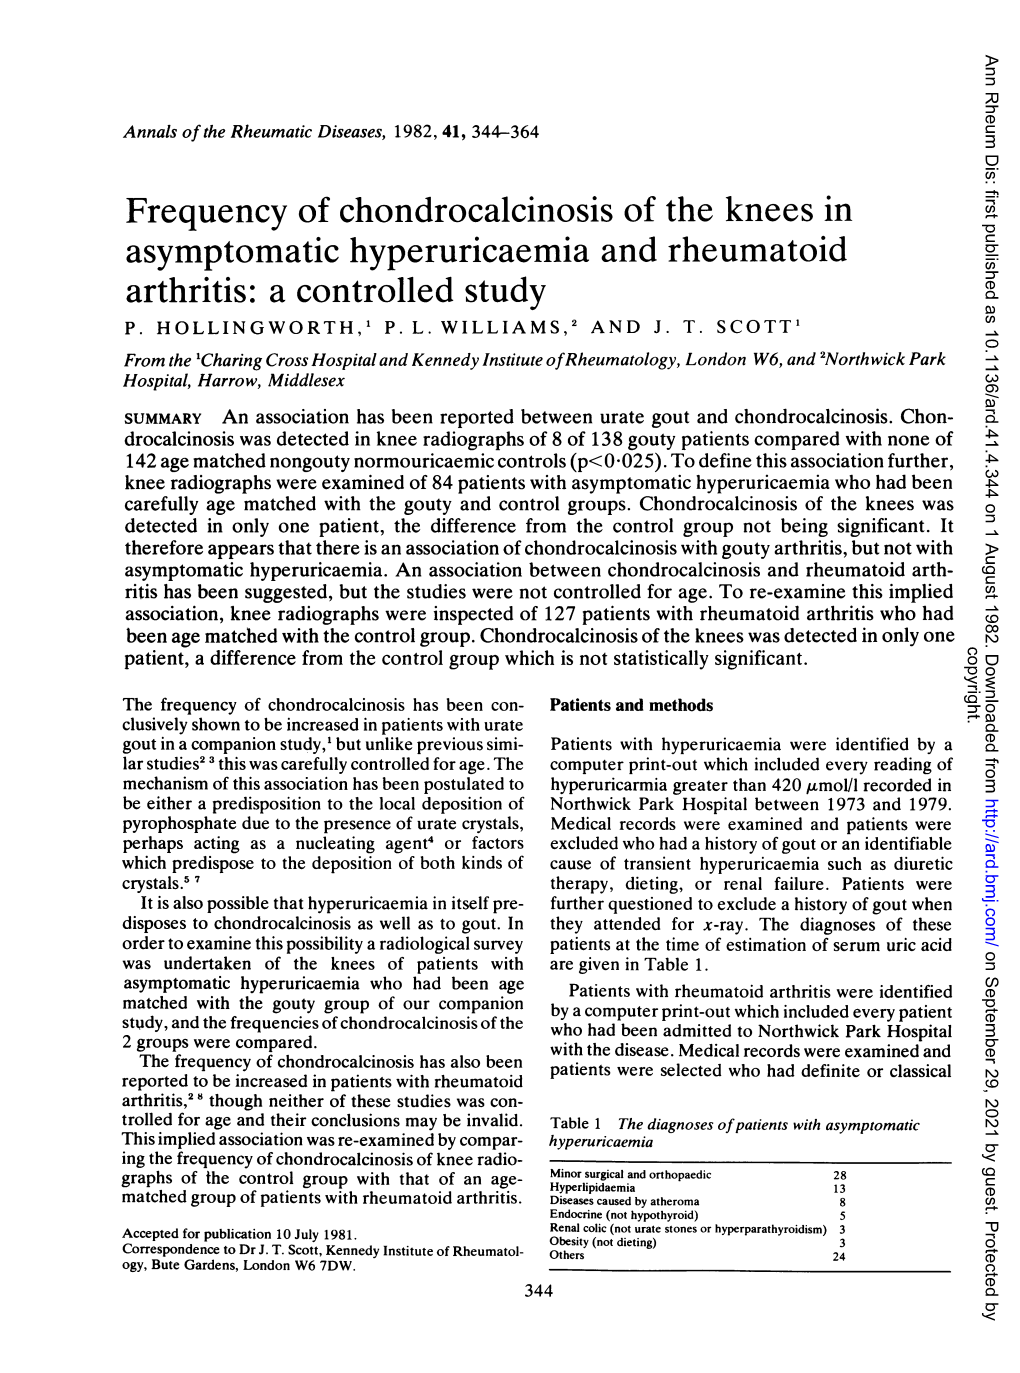 Frequency of Chondrocalcinosis of the Knees in Asymptomatic Hyperuricaemia and Rheumatoid Arthritis: a Controlled Study P